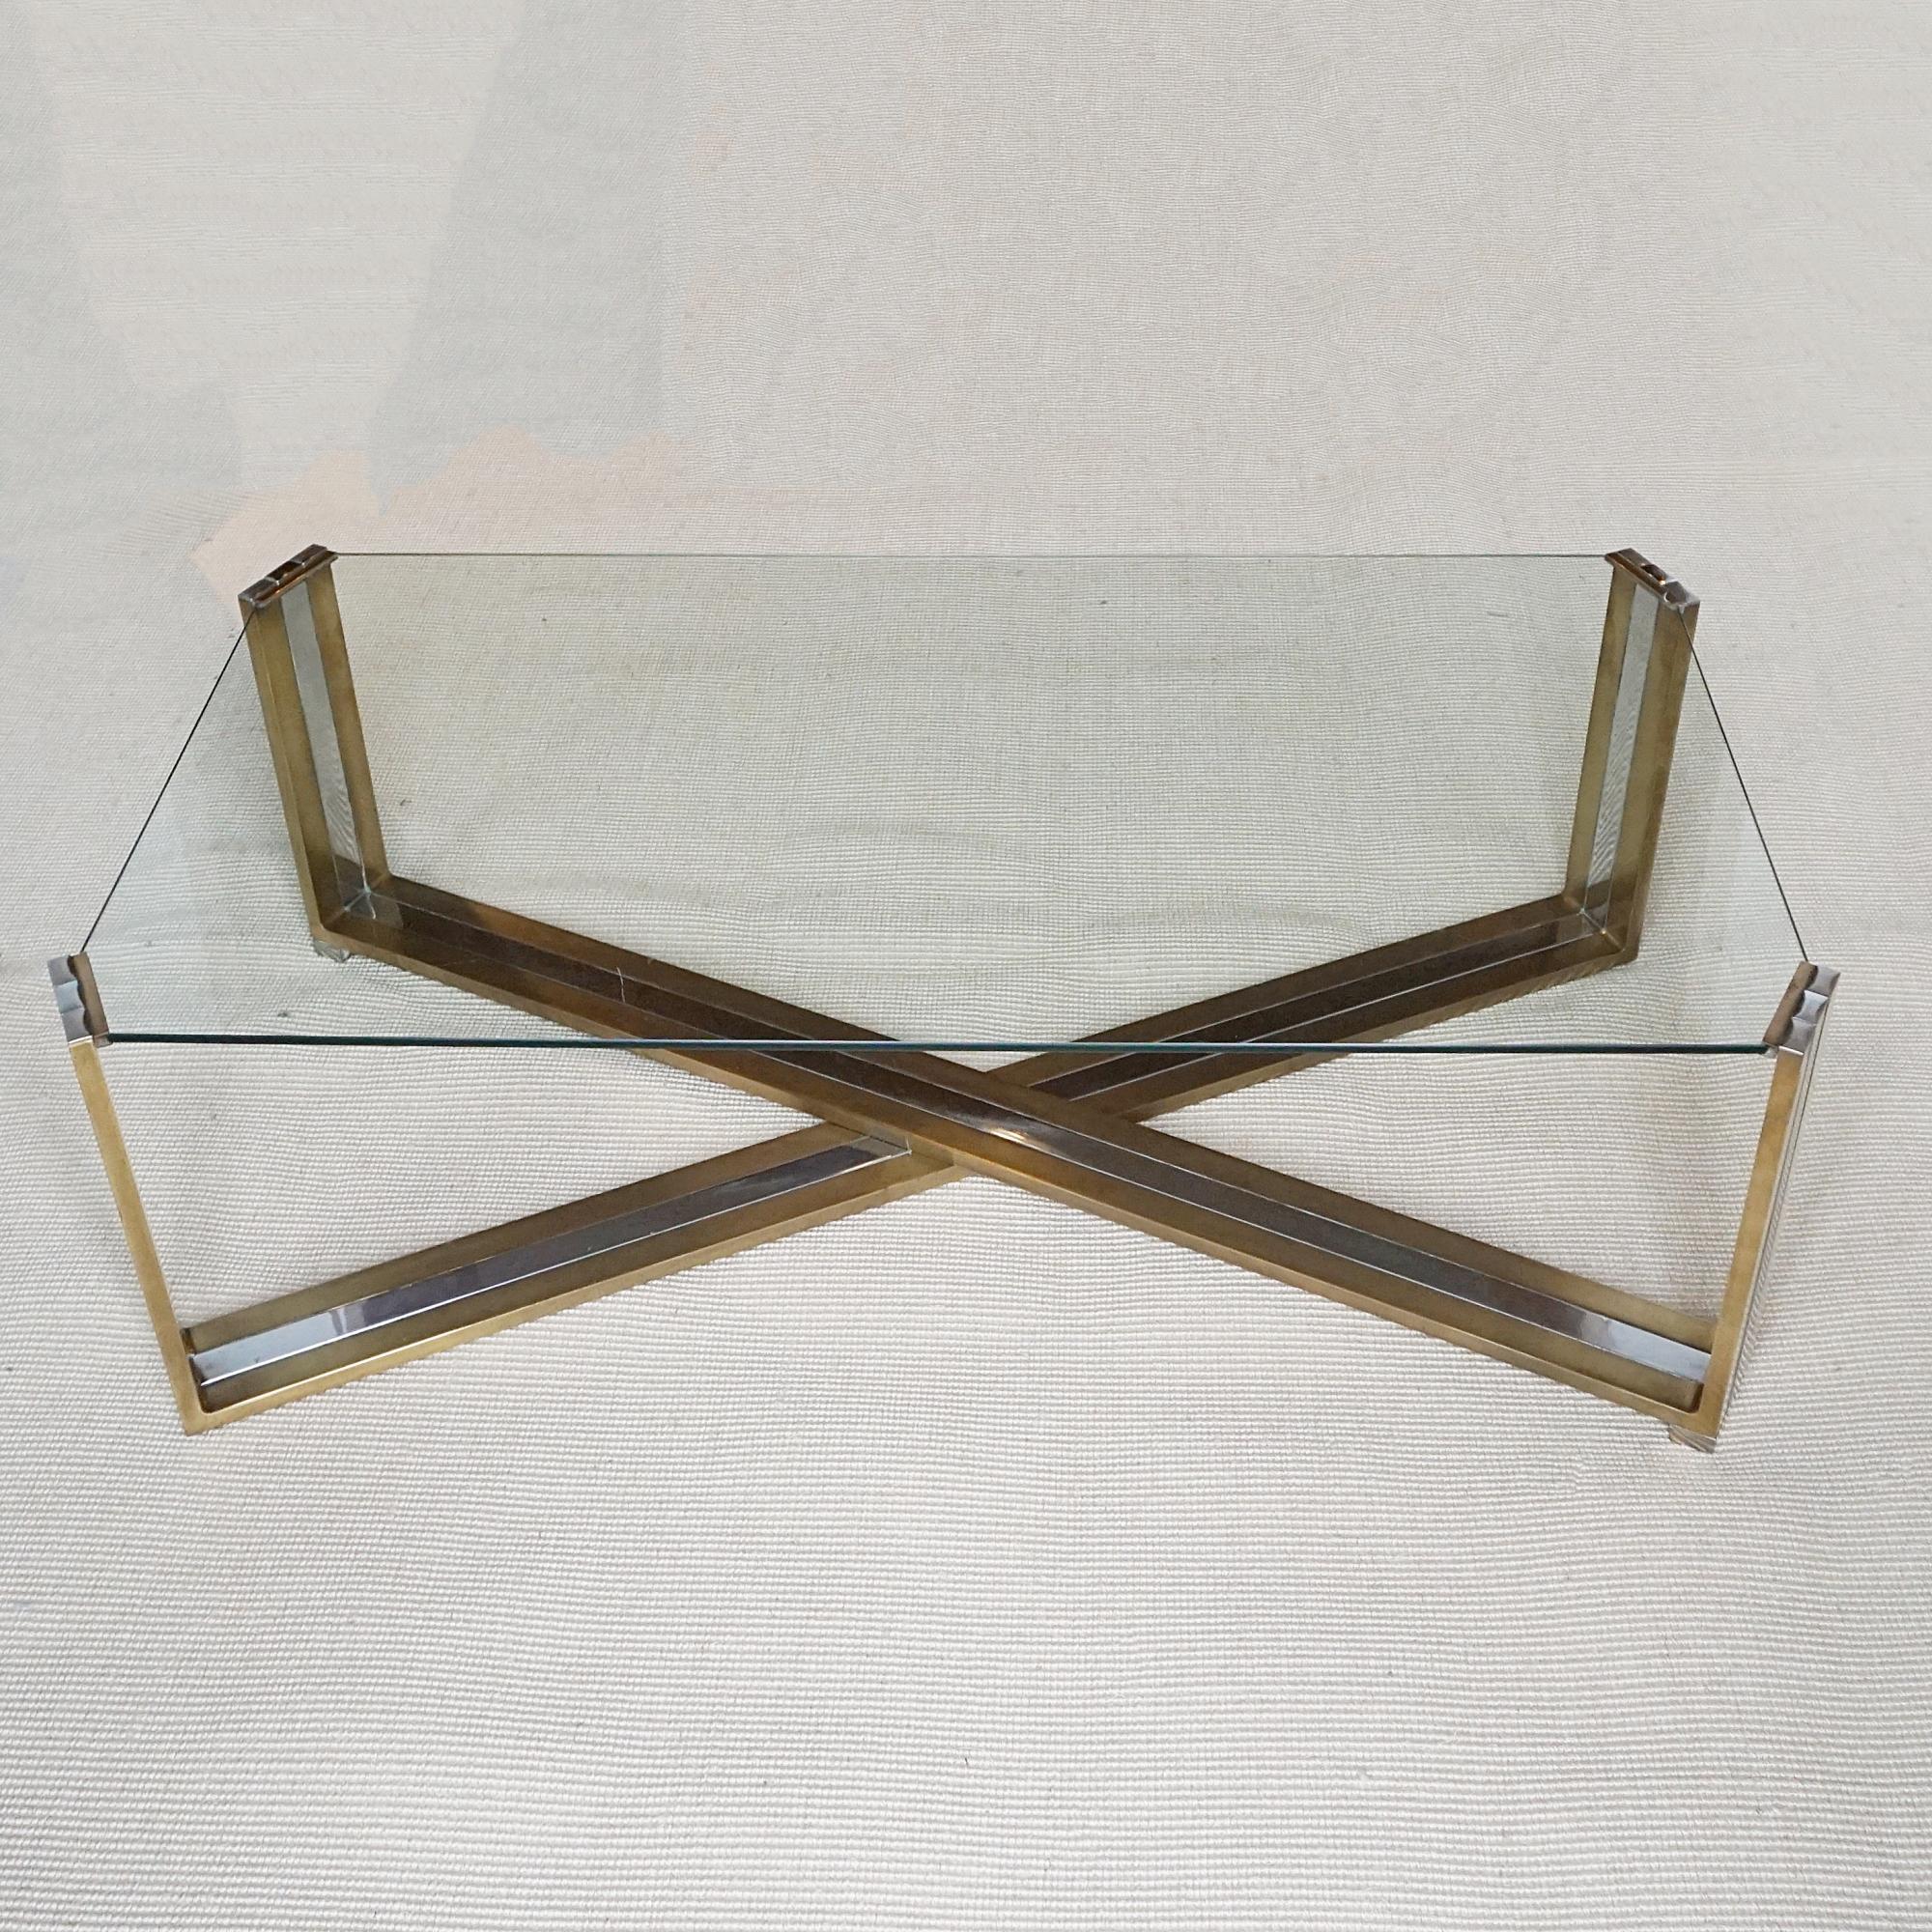 A Mid-Century coffee table designed by Romeo Rega. Brass and chrome X-frame base with inset glass top. 

Dimensions: H 35.5cm W 110cm D 60cm

Origin: Italian

Date: Circa 1970

Item Number: 1704241

Romeo Rega (1925–1981) was an emblematic figure in